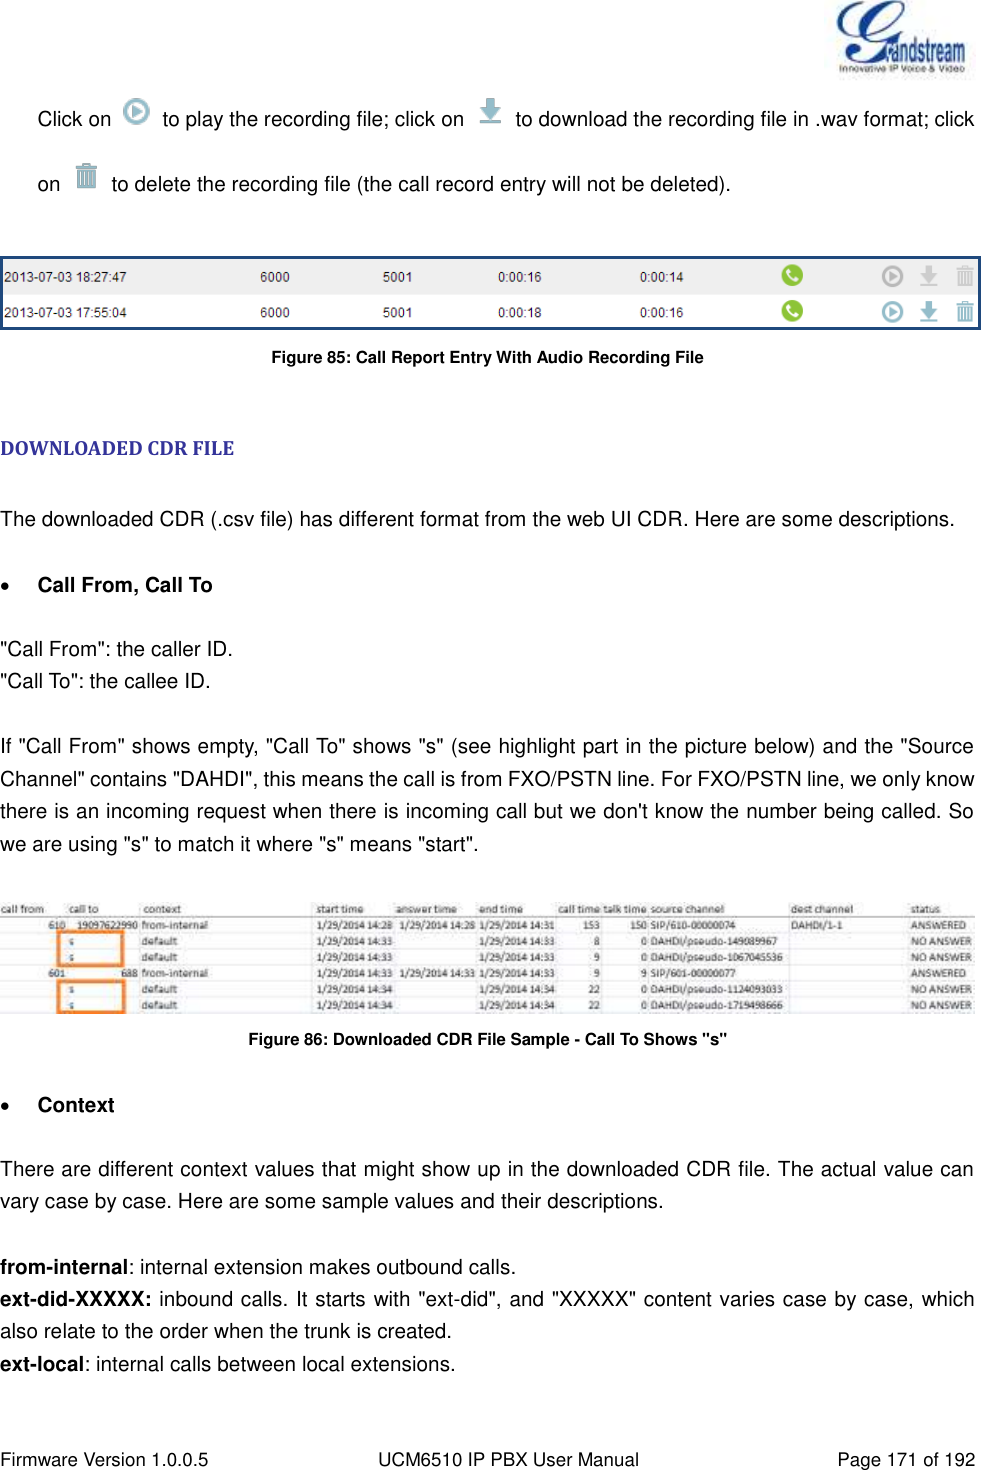  Firmware Version 1.0.0.5 UCM6510 IP PBX User Manual Page 171 of 192  Click on    to play the recording file; click on    to download the recording file in .wav format; click on    to delete the recording file (the call record entry will not be deleted).   Figure 85: Call Report Entry With Audio Recording File  DOWNLOADED CDR FILE  The downloaded CDR (.csv file) has different format from the web UI CDR. Here are some descriptions.   Call From, Call To  &quot;Call From&quot;: the caller ID. &quot;Call To&quot;: the callee ID.  If &quot;Call From&quot; shows empty, &quot;Call To&quot; shows &quot;s&quot; (see highlight part in the picture below) and the &quot;Source Channel&quot; contains &quot;DAHDI&quot;, this means the call is from FXO/PSTN line. For FXO/PSTN line, we only know there is an incoming request when there is incoming call but we don&apos;t know the number being called. So we are using &quot;s&quot; to match it where &quot;s&quot; means &quot;start&quot;.   Figure 86: Downloaded CDR File Sample - Call To Shows &quot;s&quot;   Context  There are different context values that might show up in the downloaded CDR file. The actual value can vary case by case. Here are some sample values and their descriptions.  from-internal: internal extension makes outbound calls. ext-did-XXXXX: inbound calls. It starts with &quot;ext-did&quot;, and &quot;XXXXX&quot; content varies case by case, which also relate to the order when the trunk is created. ext-local: internal calls between local extensions.  